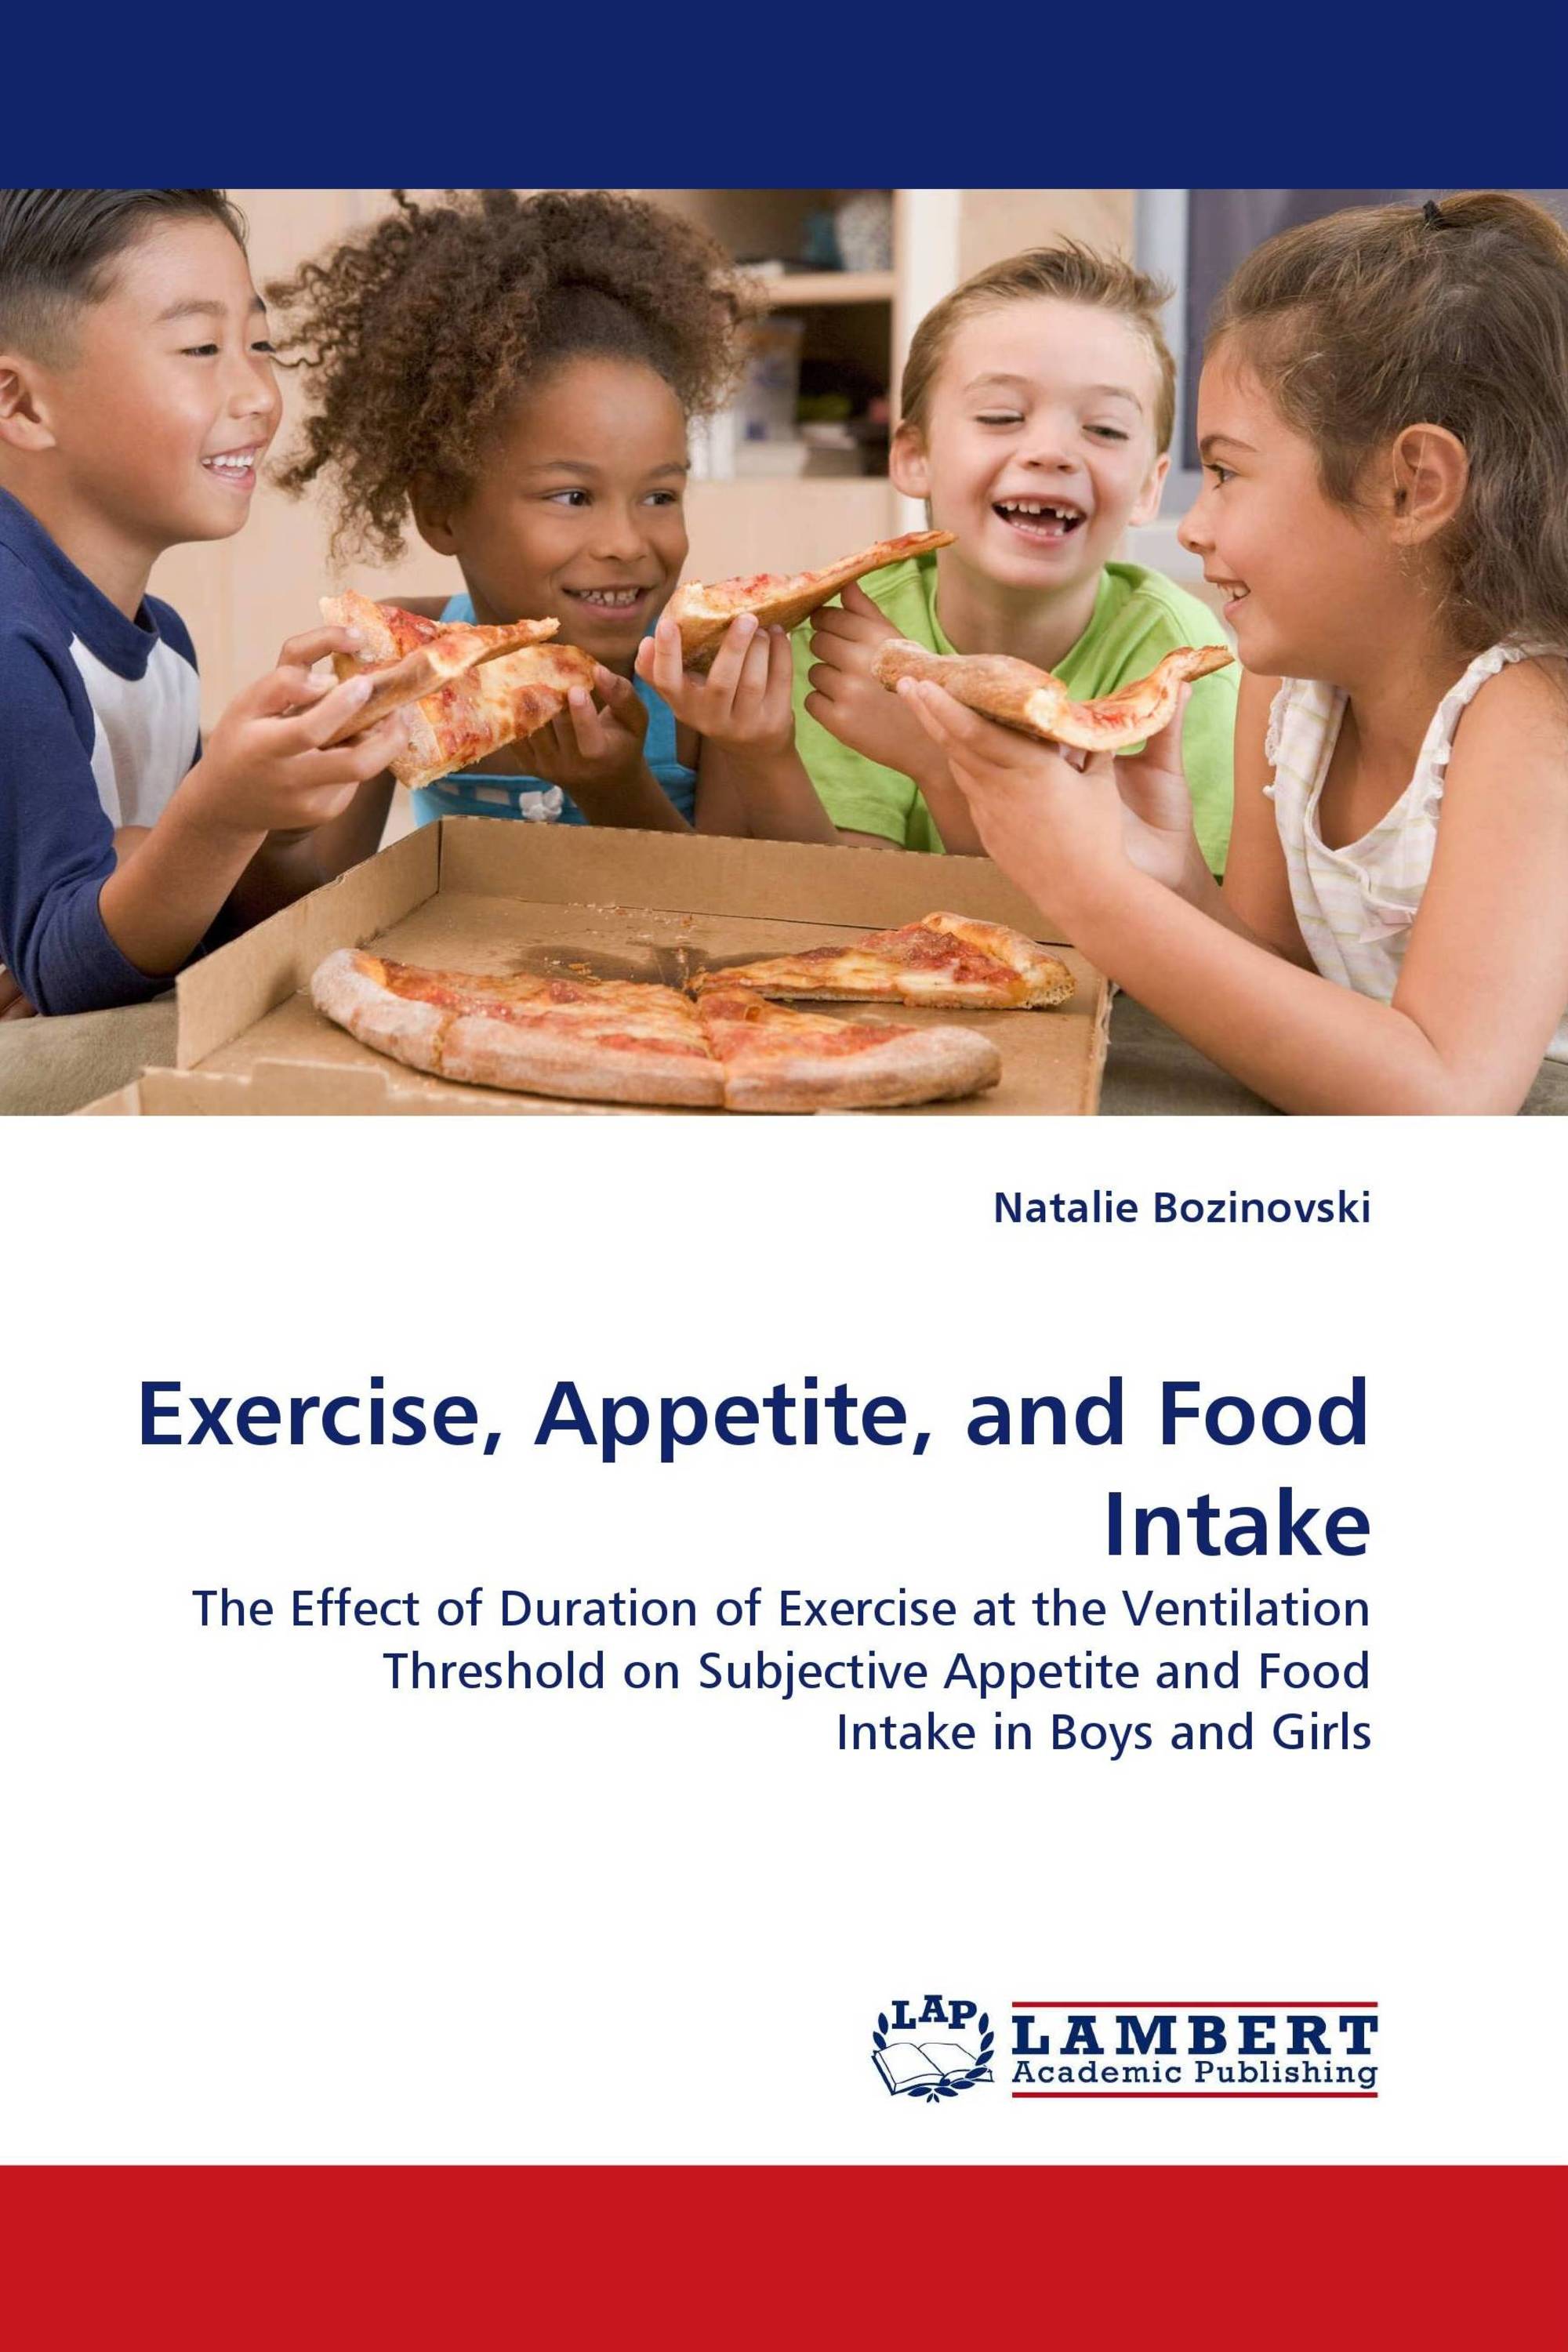 Exercise, Appetite, and Food Intake